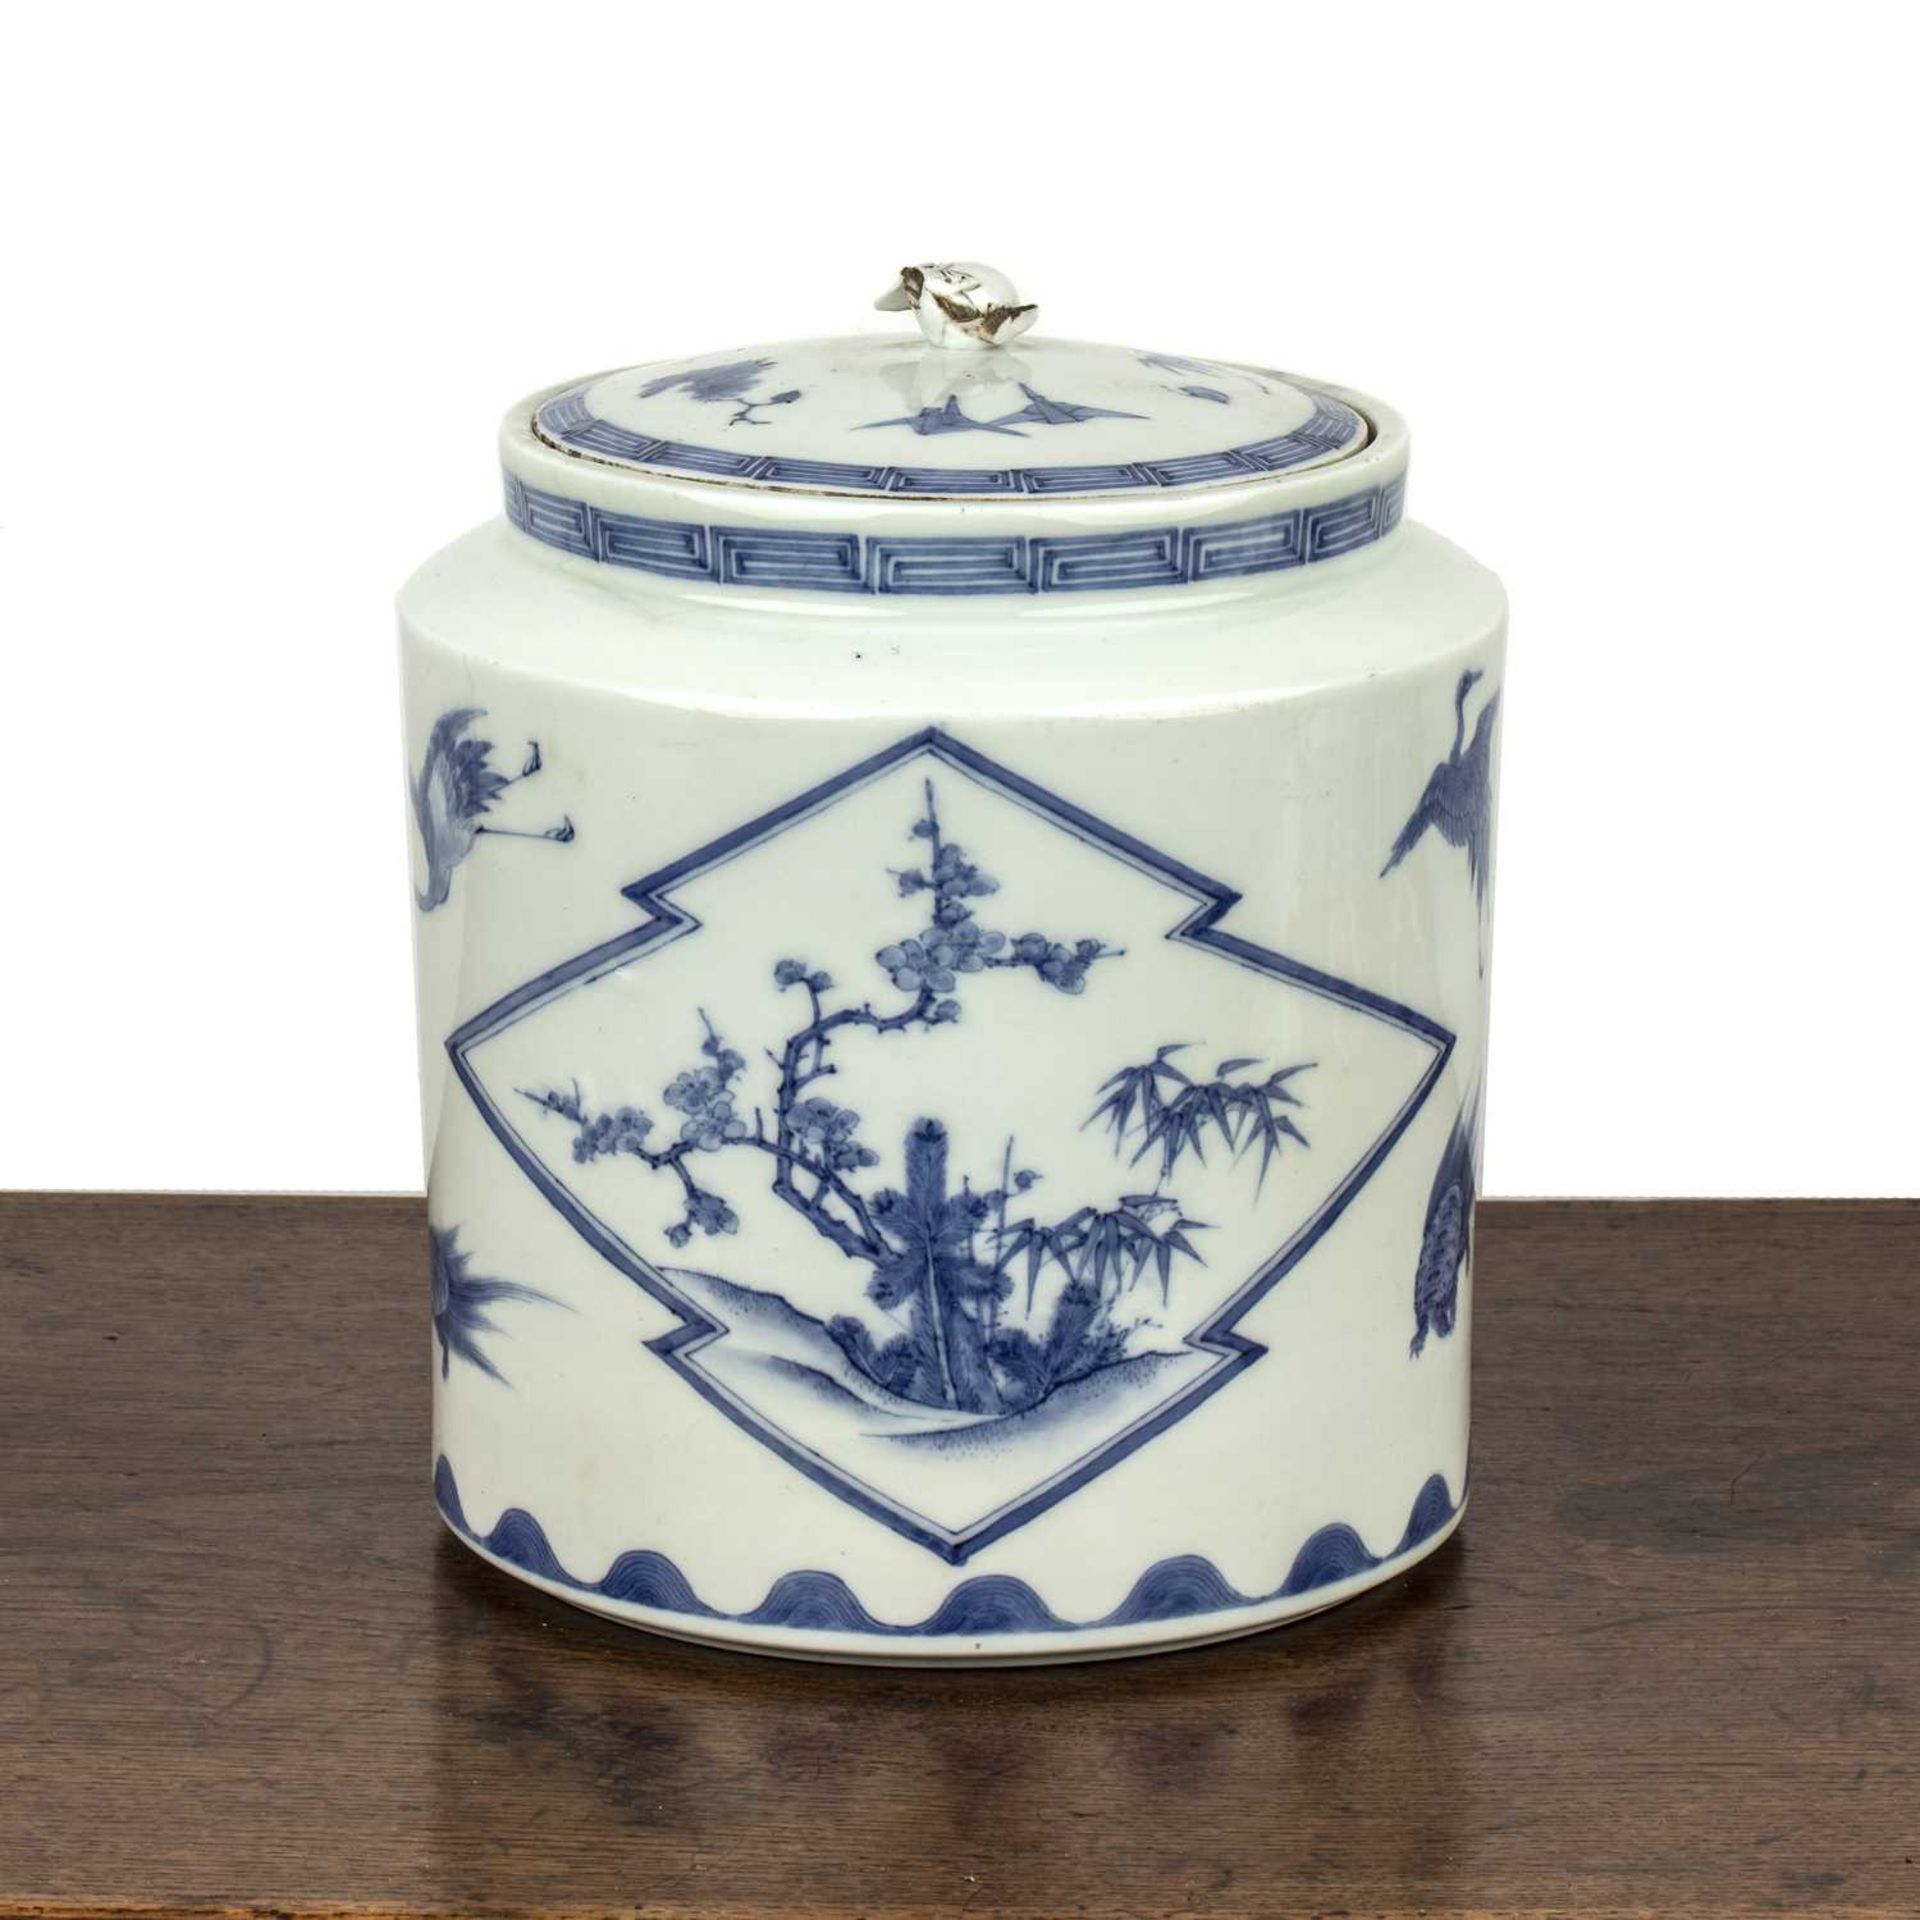 Hirado blue and white porcelain jar and cover Japanese, painted with stalks and panels of blossom